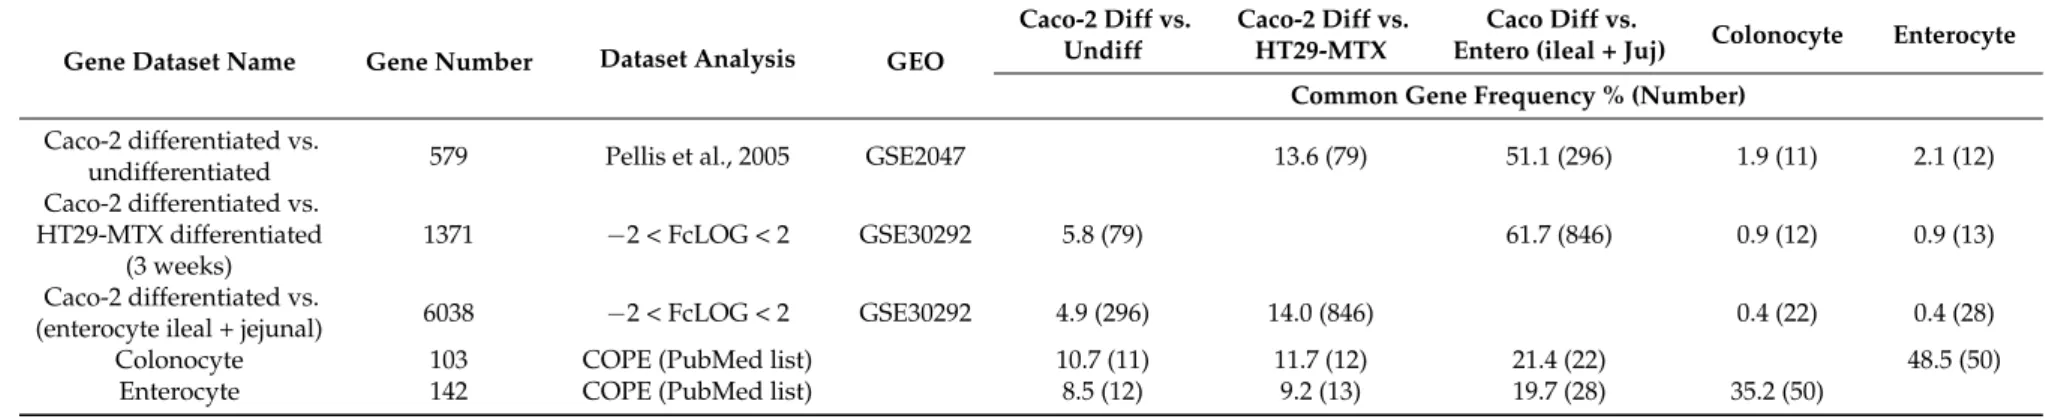 Table 1. Gene datasets used for intestinal phenotype analysis. Datasets were retrieved from Gene Ontology Datasets (GEO) at www.ncbi.nih.gov, raised from fold changes (FcLOG), or published at COPE http://www.copewithcytokines.de/cope.cg